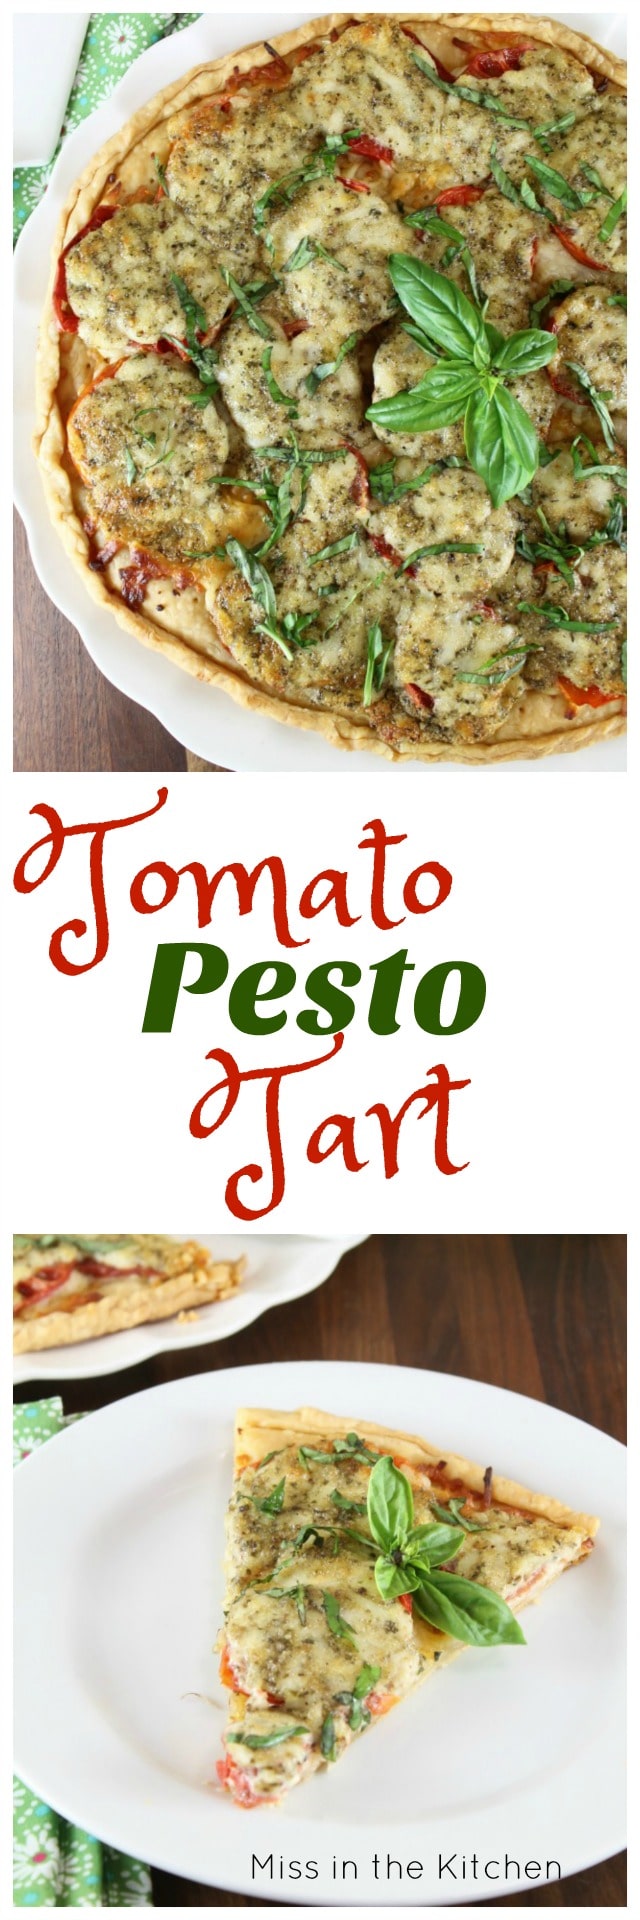 Tomato Pesto Tart Recipe is a delicious summer appetizer for parties! Get the recipe at MissintheKitchen.com